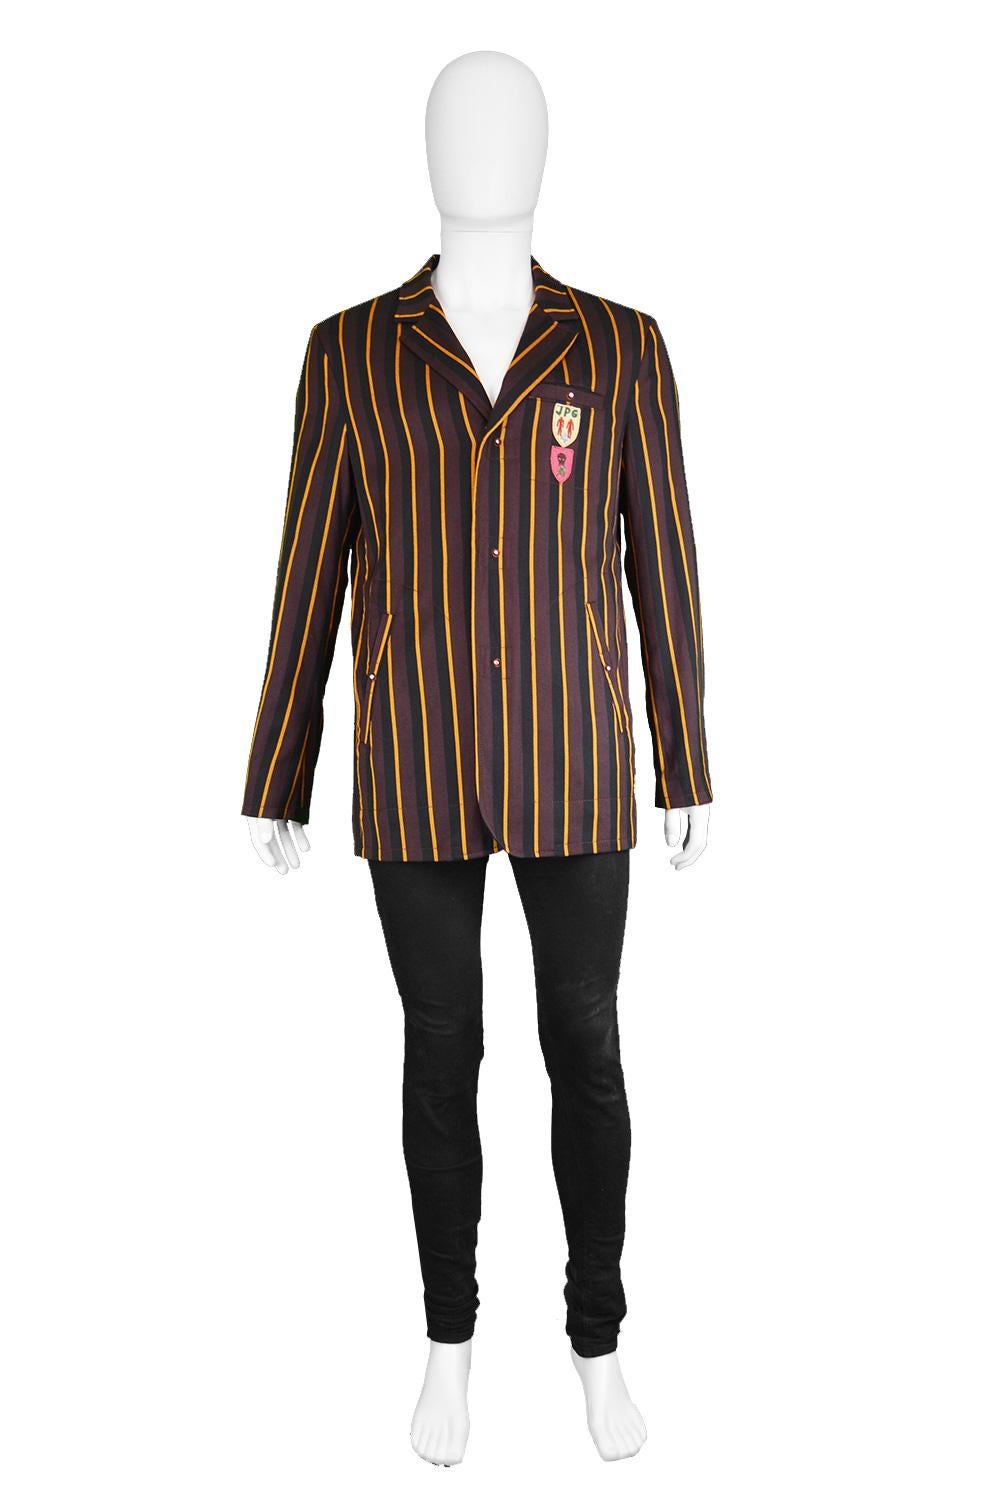 Jean Paul Gaultier JPG Vintage Mens Wool & Cotton Stripe Embroidered Boating Blazer, 1990s

Click 'Continue Reading' for size and description.

Size: Marked I 50 / US 34 / F 42 / GB 40 / D 50 which is roughly a men's Medium. Please check